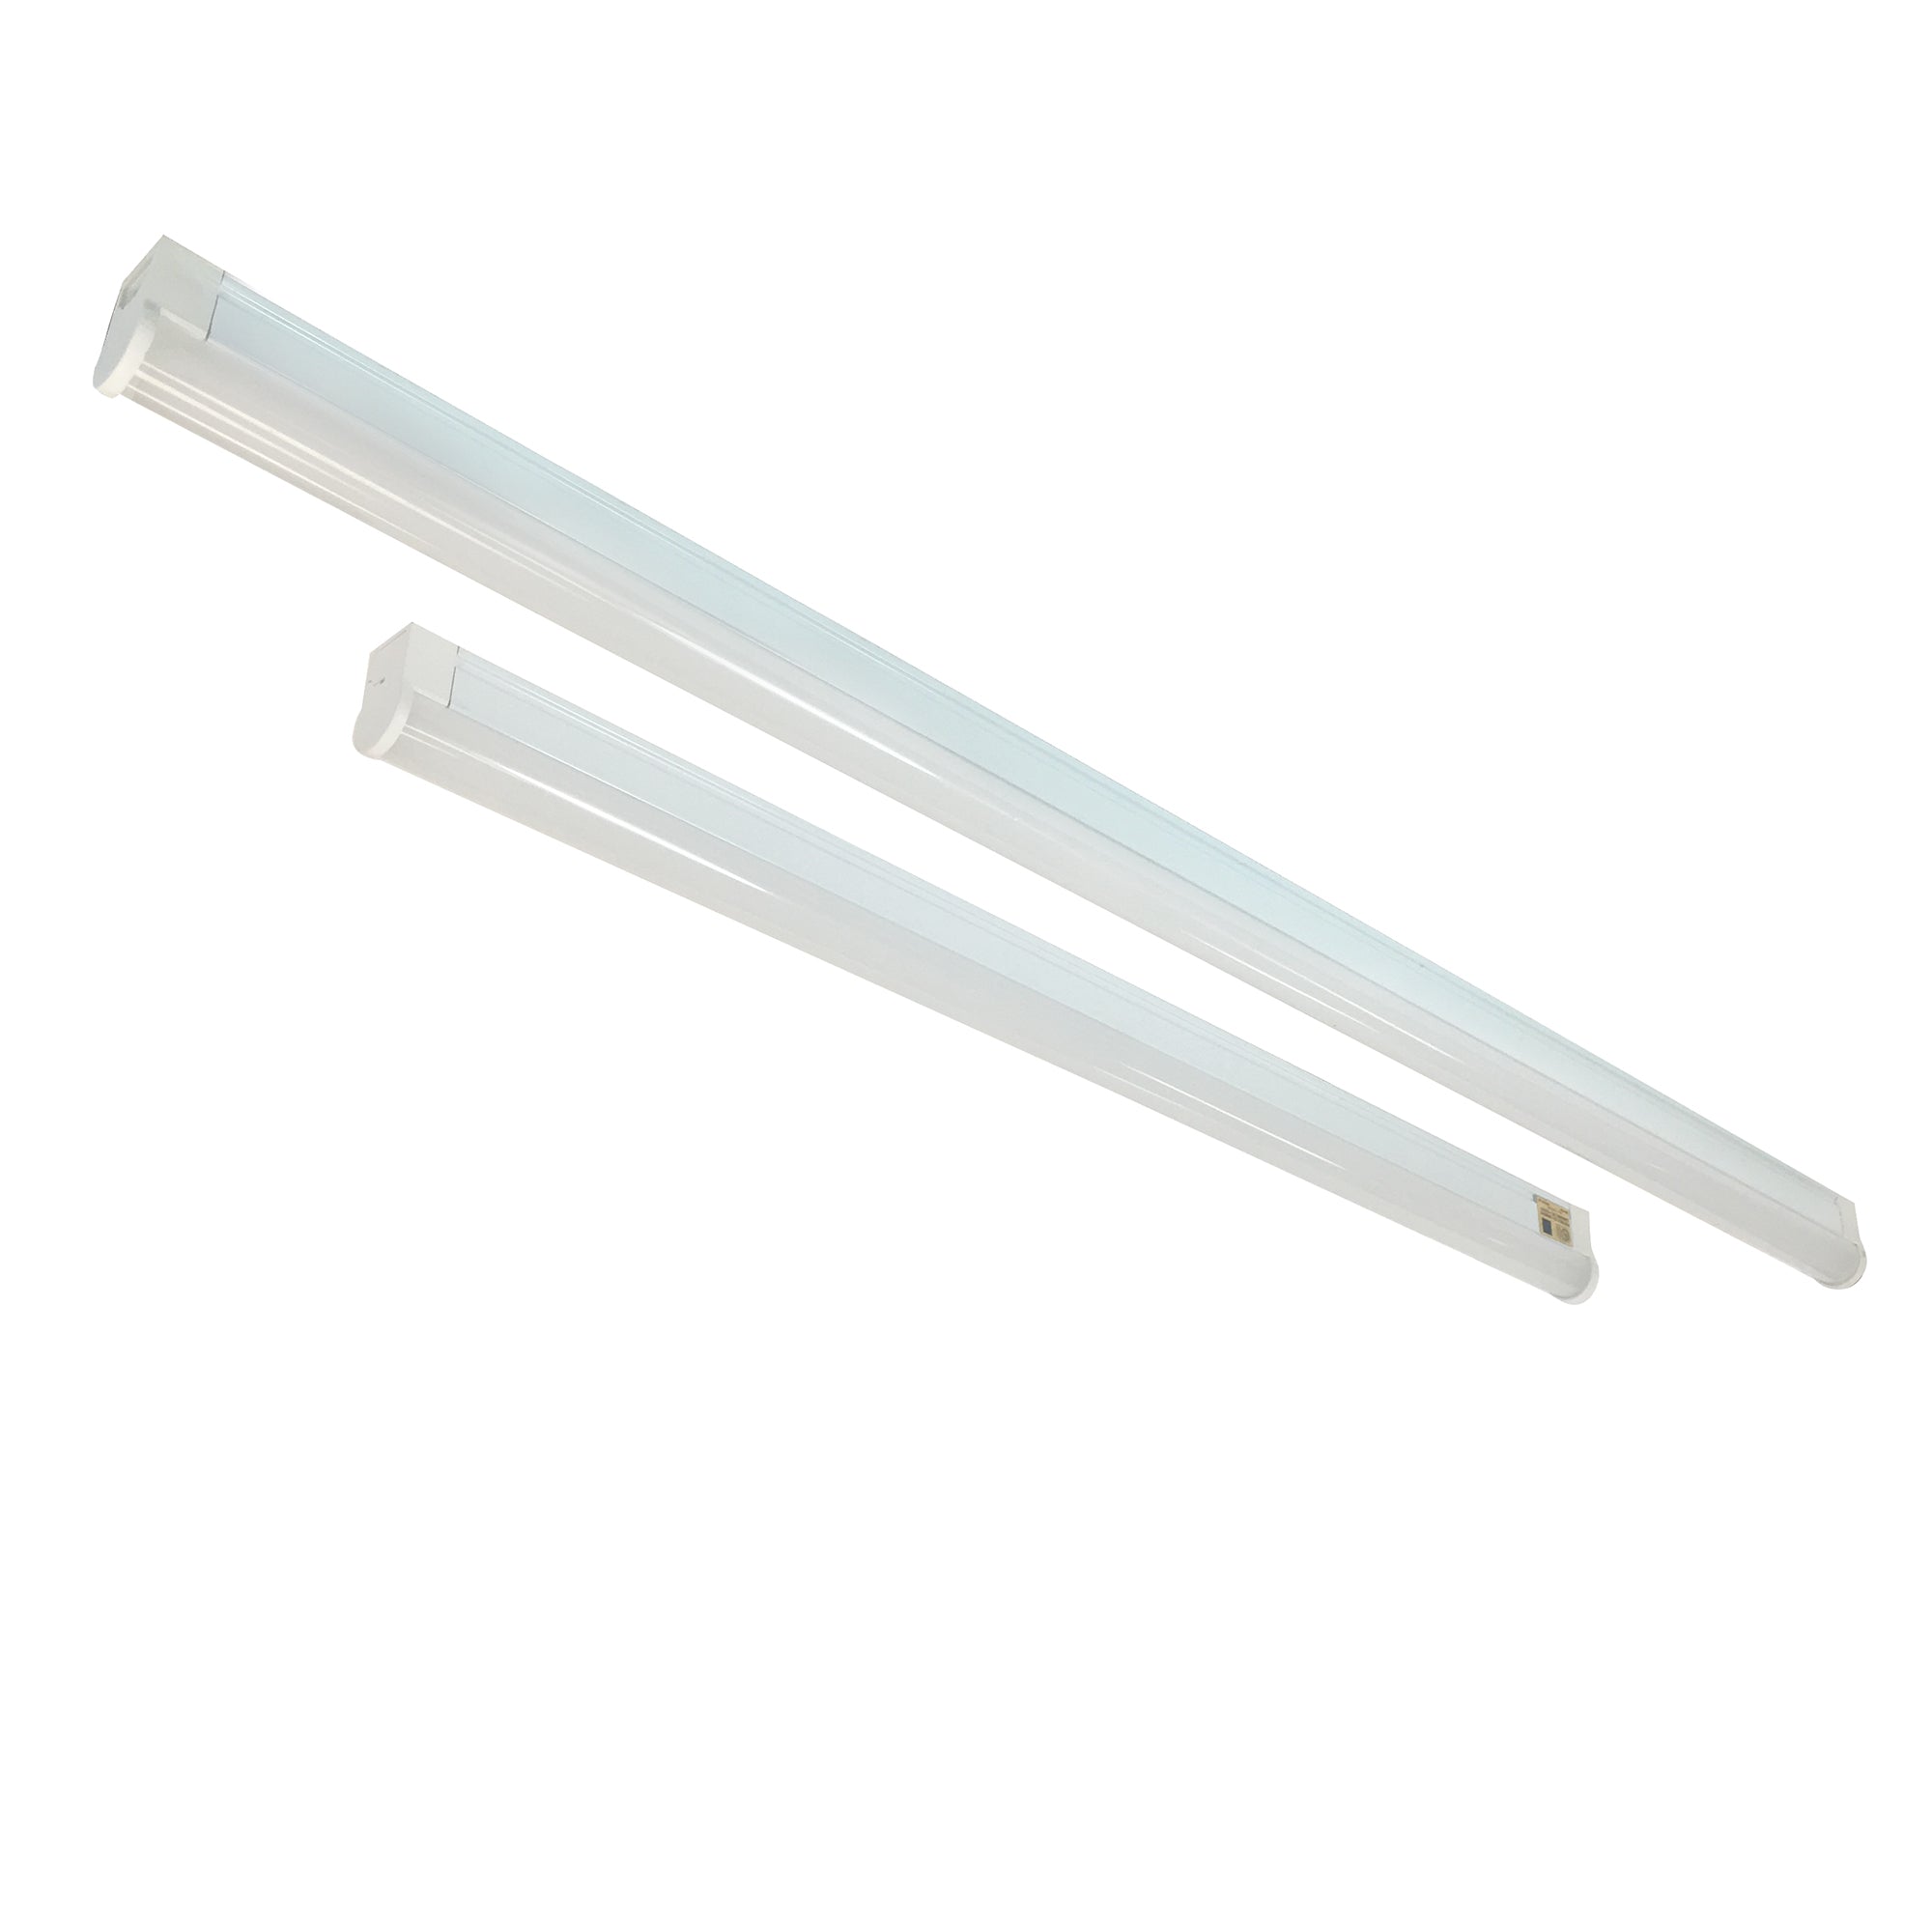 Nora Lighting NULS-LED2130W - Accent / Undercabinet - 21 Inch LED Linear Undercabinet, 3000K, White